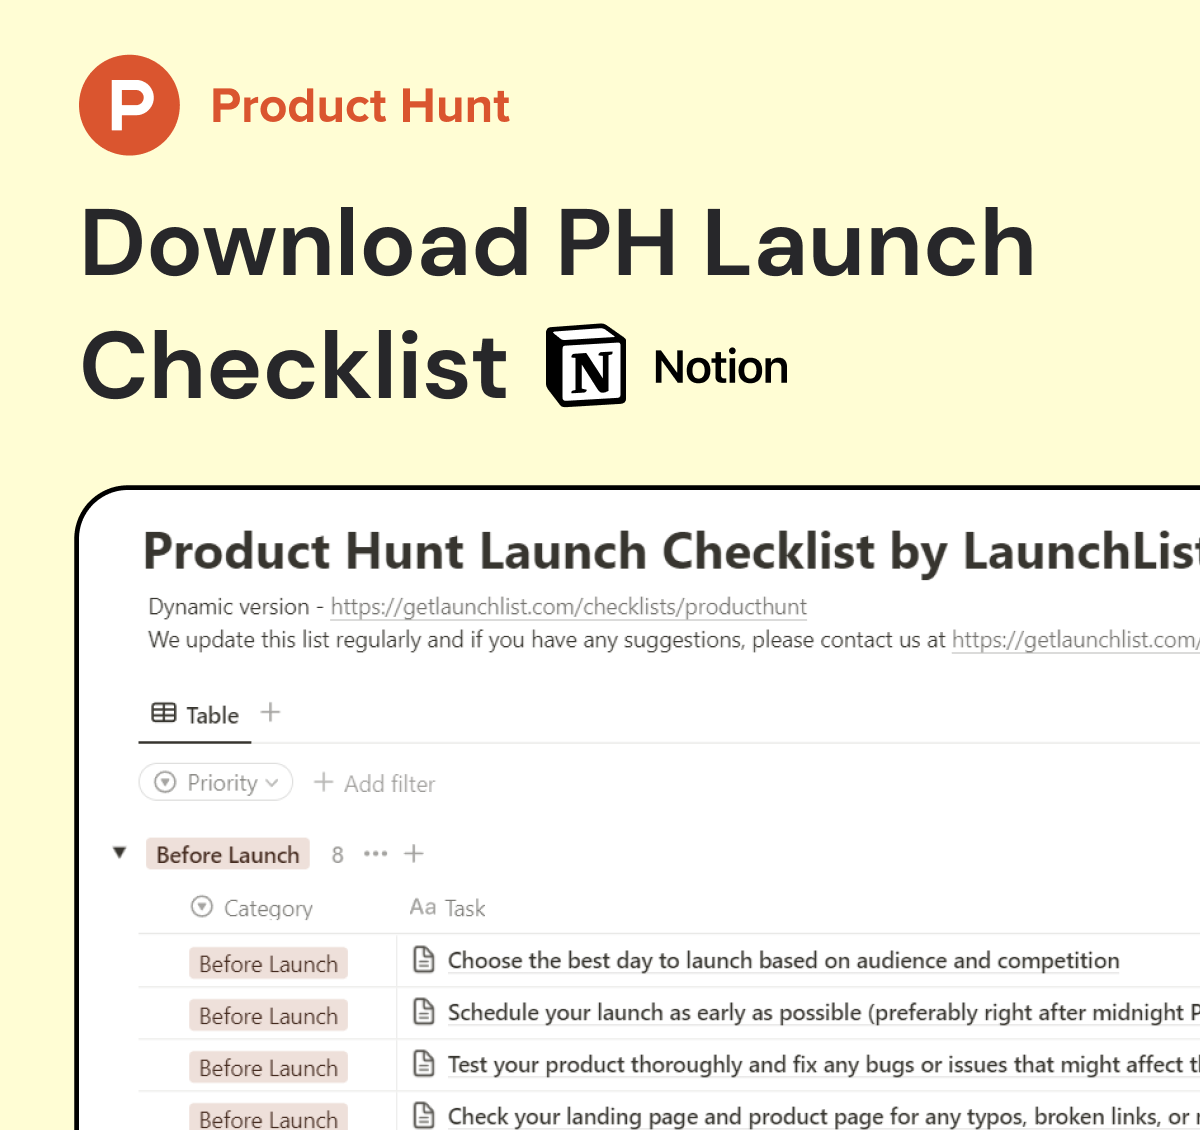 Download Product Hunt Launch Checklist - Notion